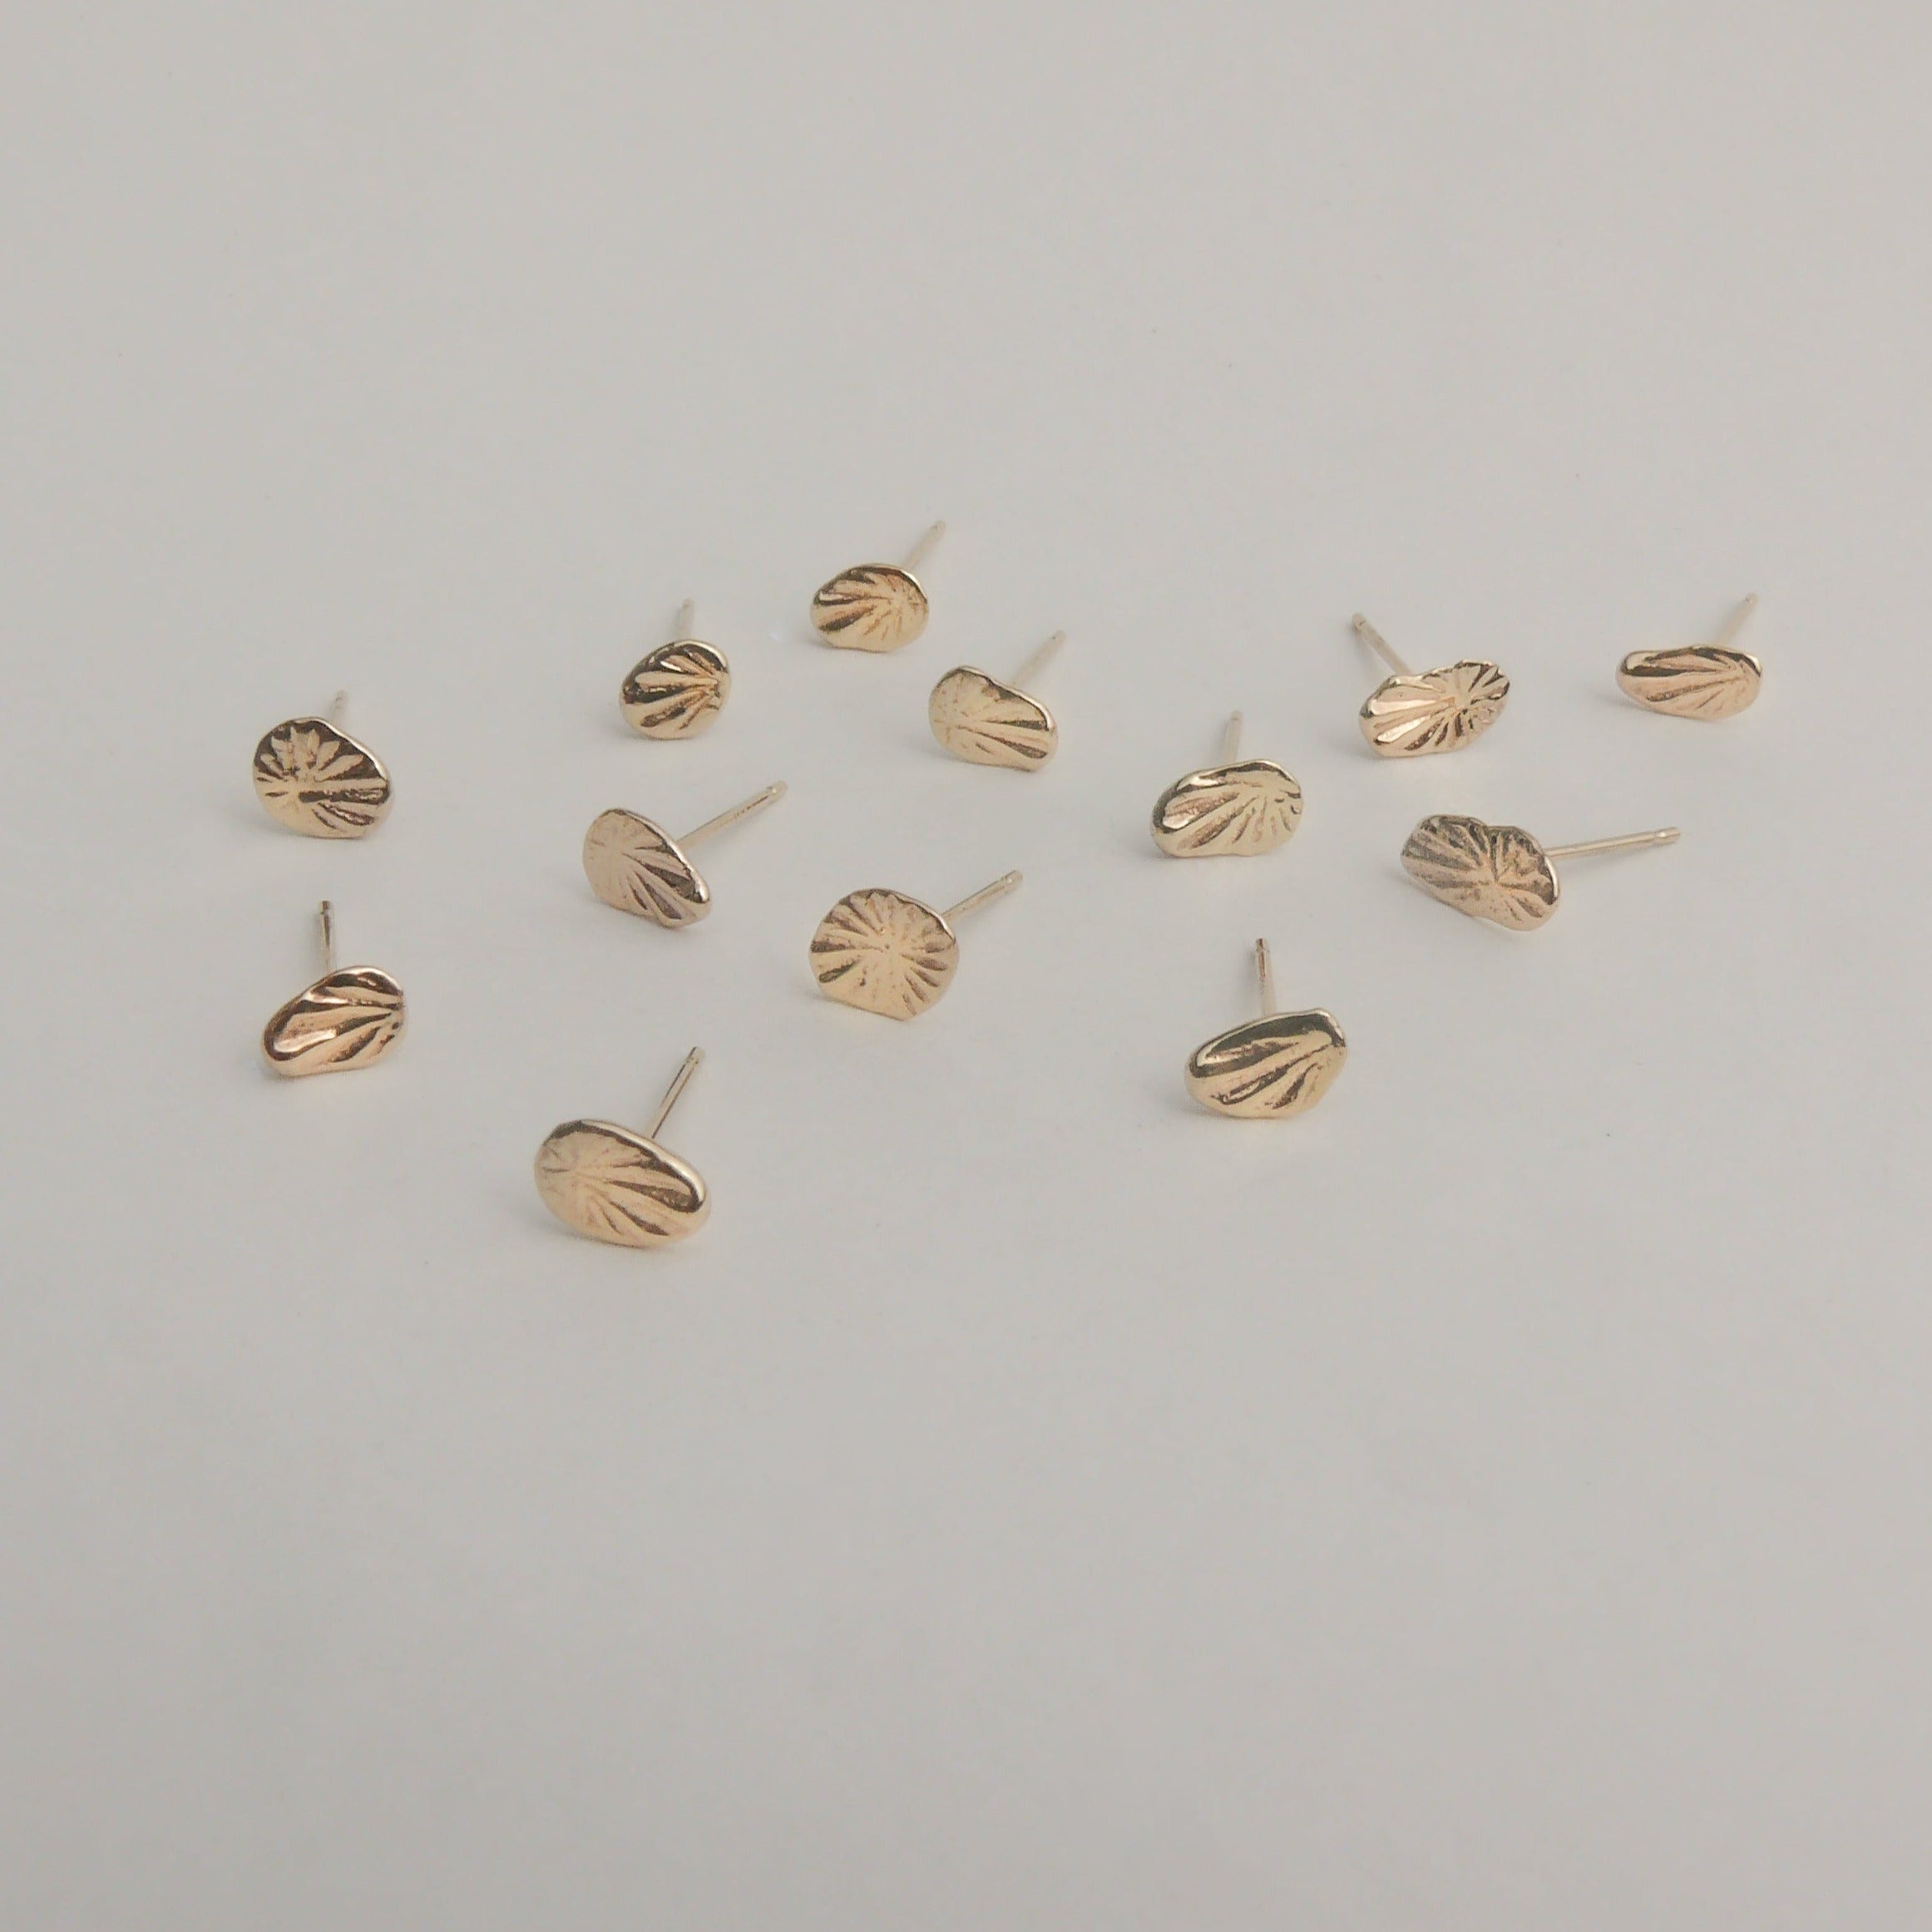 Made Line Jewelry, recycled 14k gold Ray Stud Earrings on white background